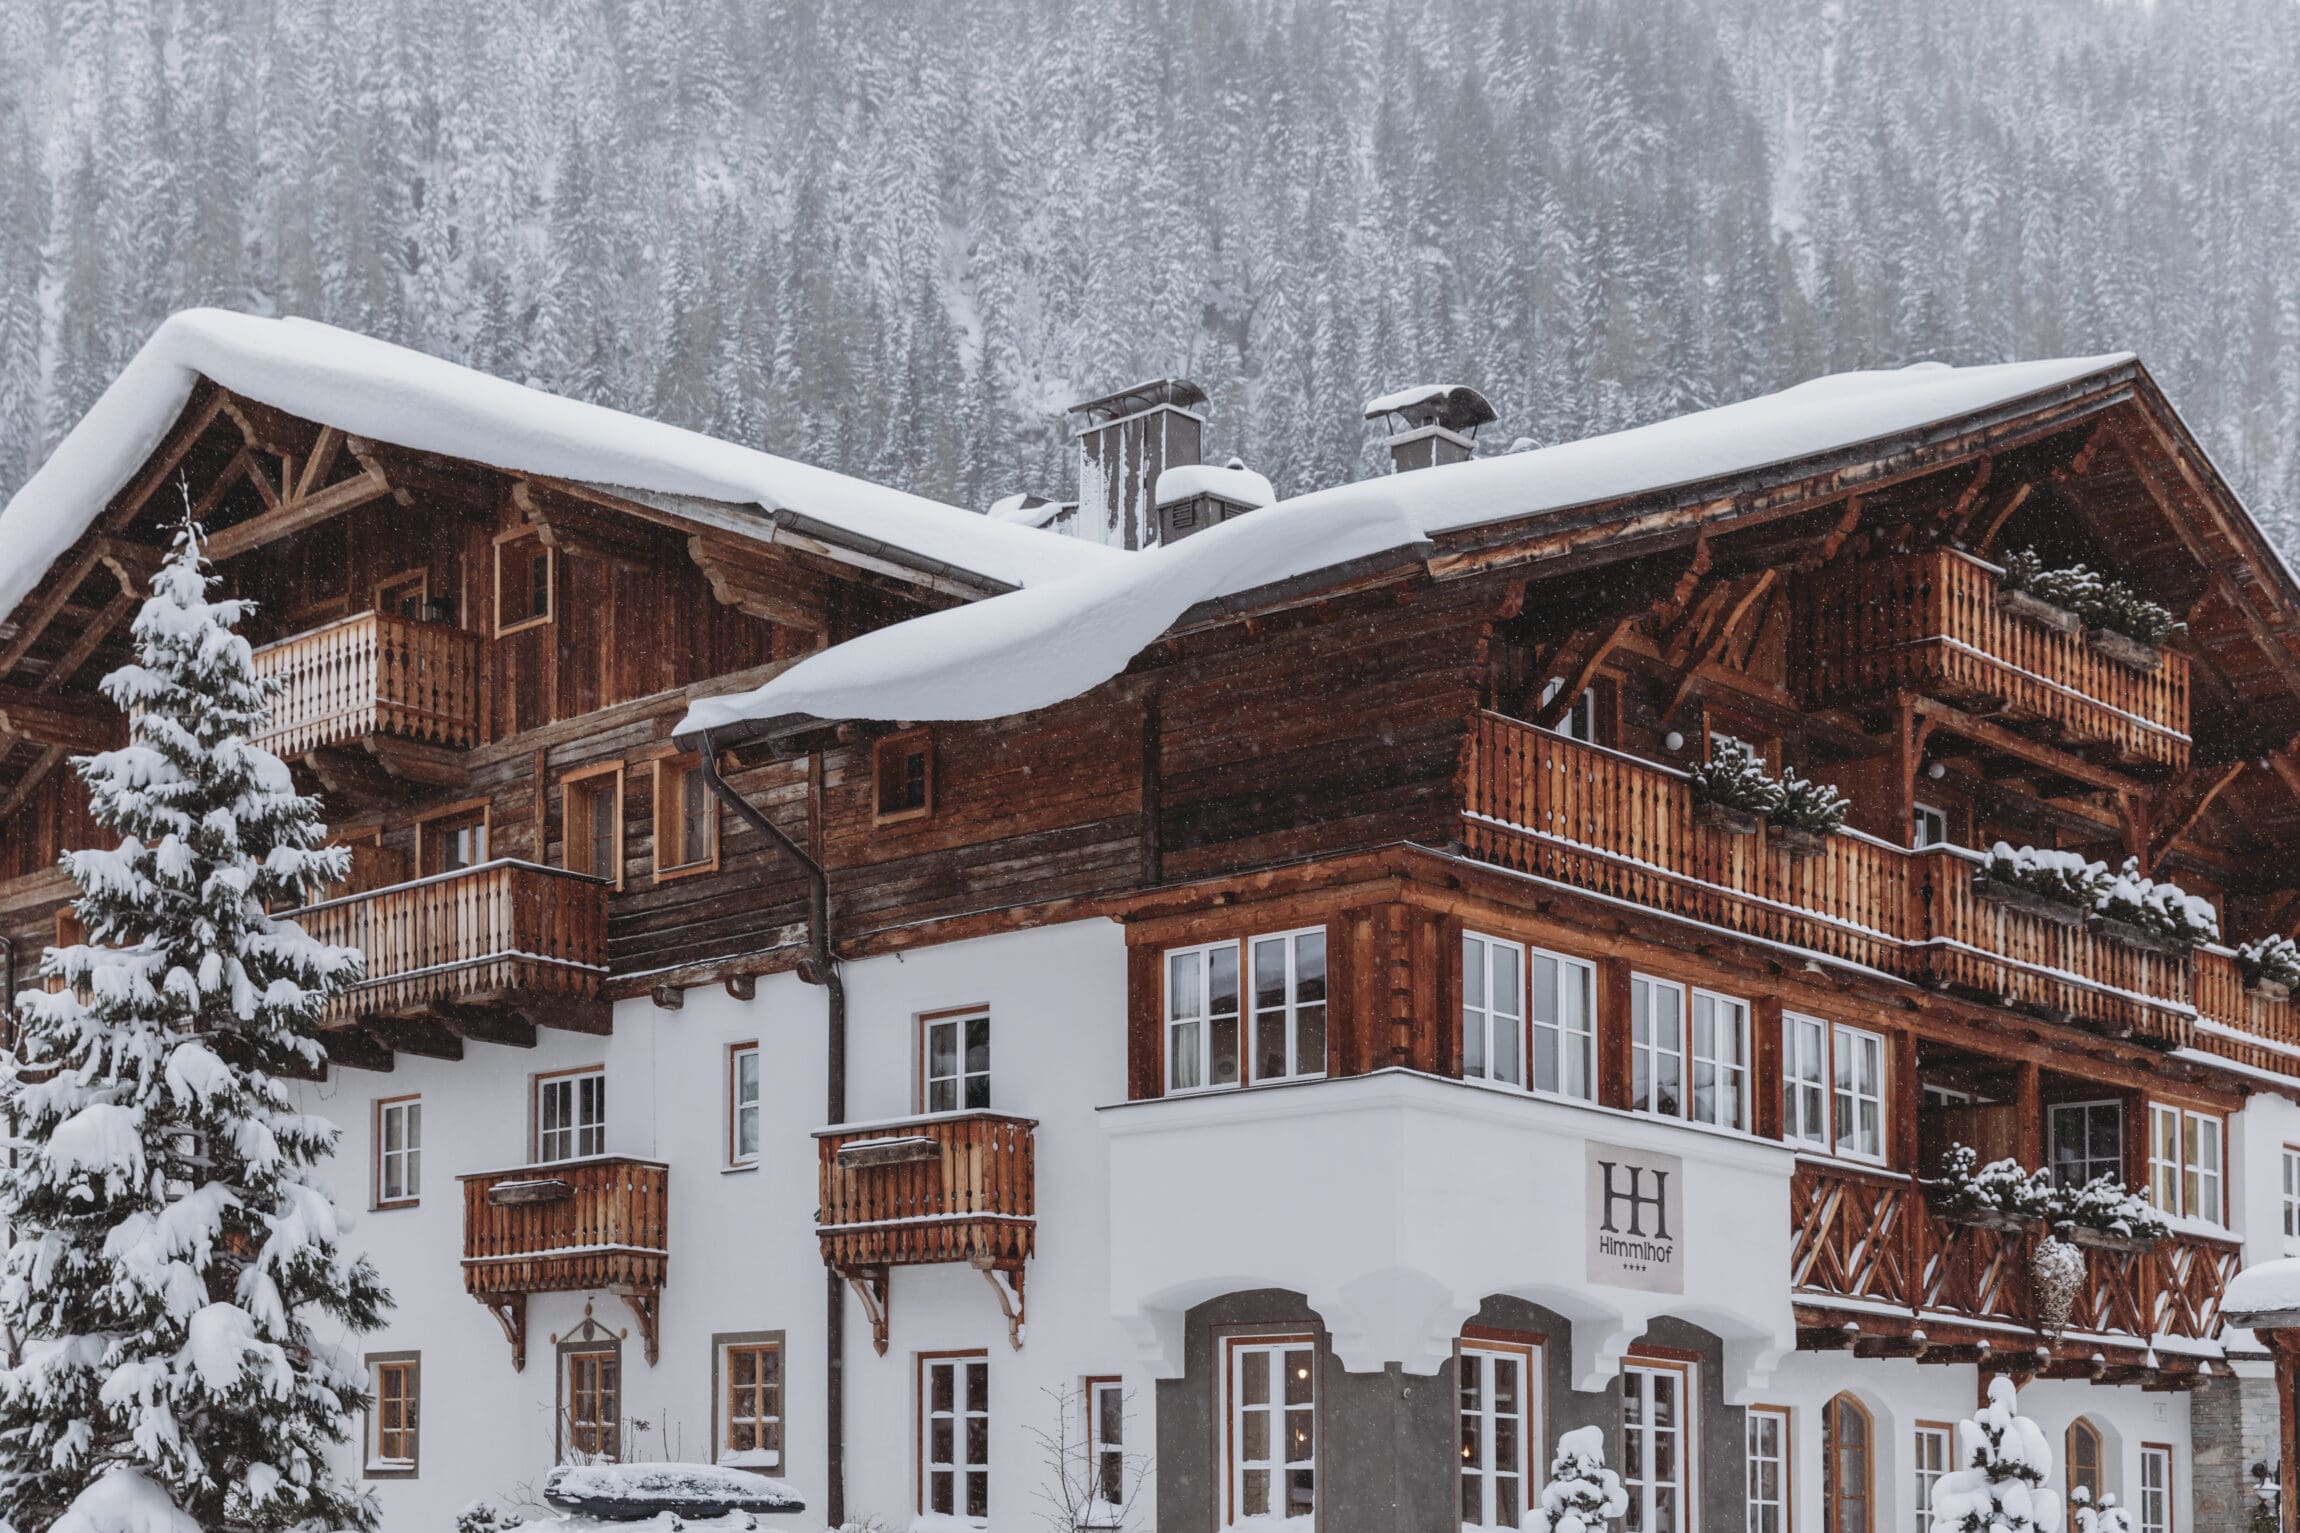 The most spectacular places to stay in the Alps this winter | St Anton's Himmlhof hotel